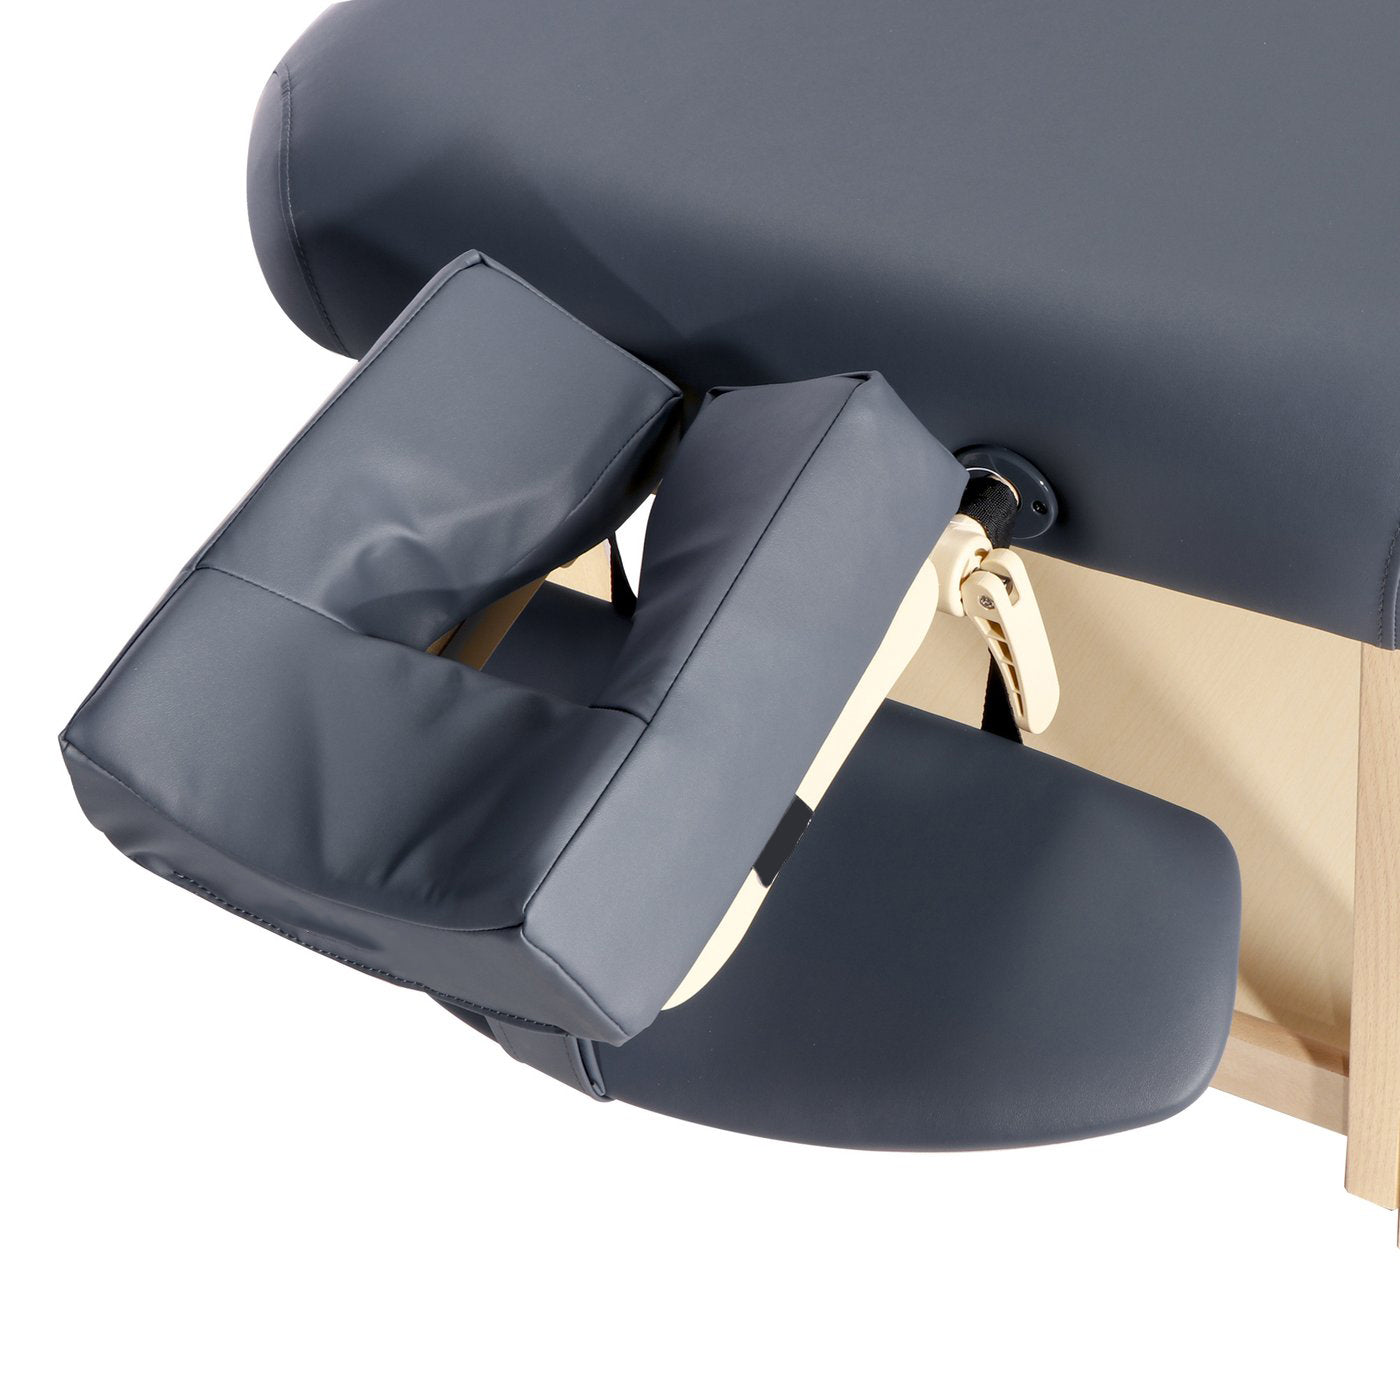 30" LAGUNA™ Stationary Massage Table Package - GREAT for Private Practitioners! (Navy Blue)